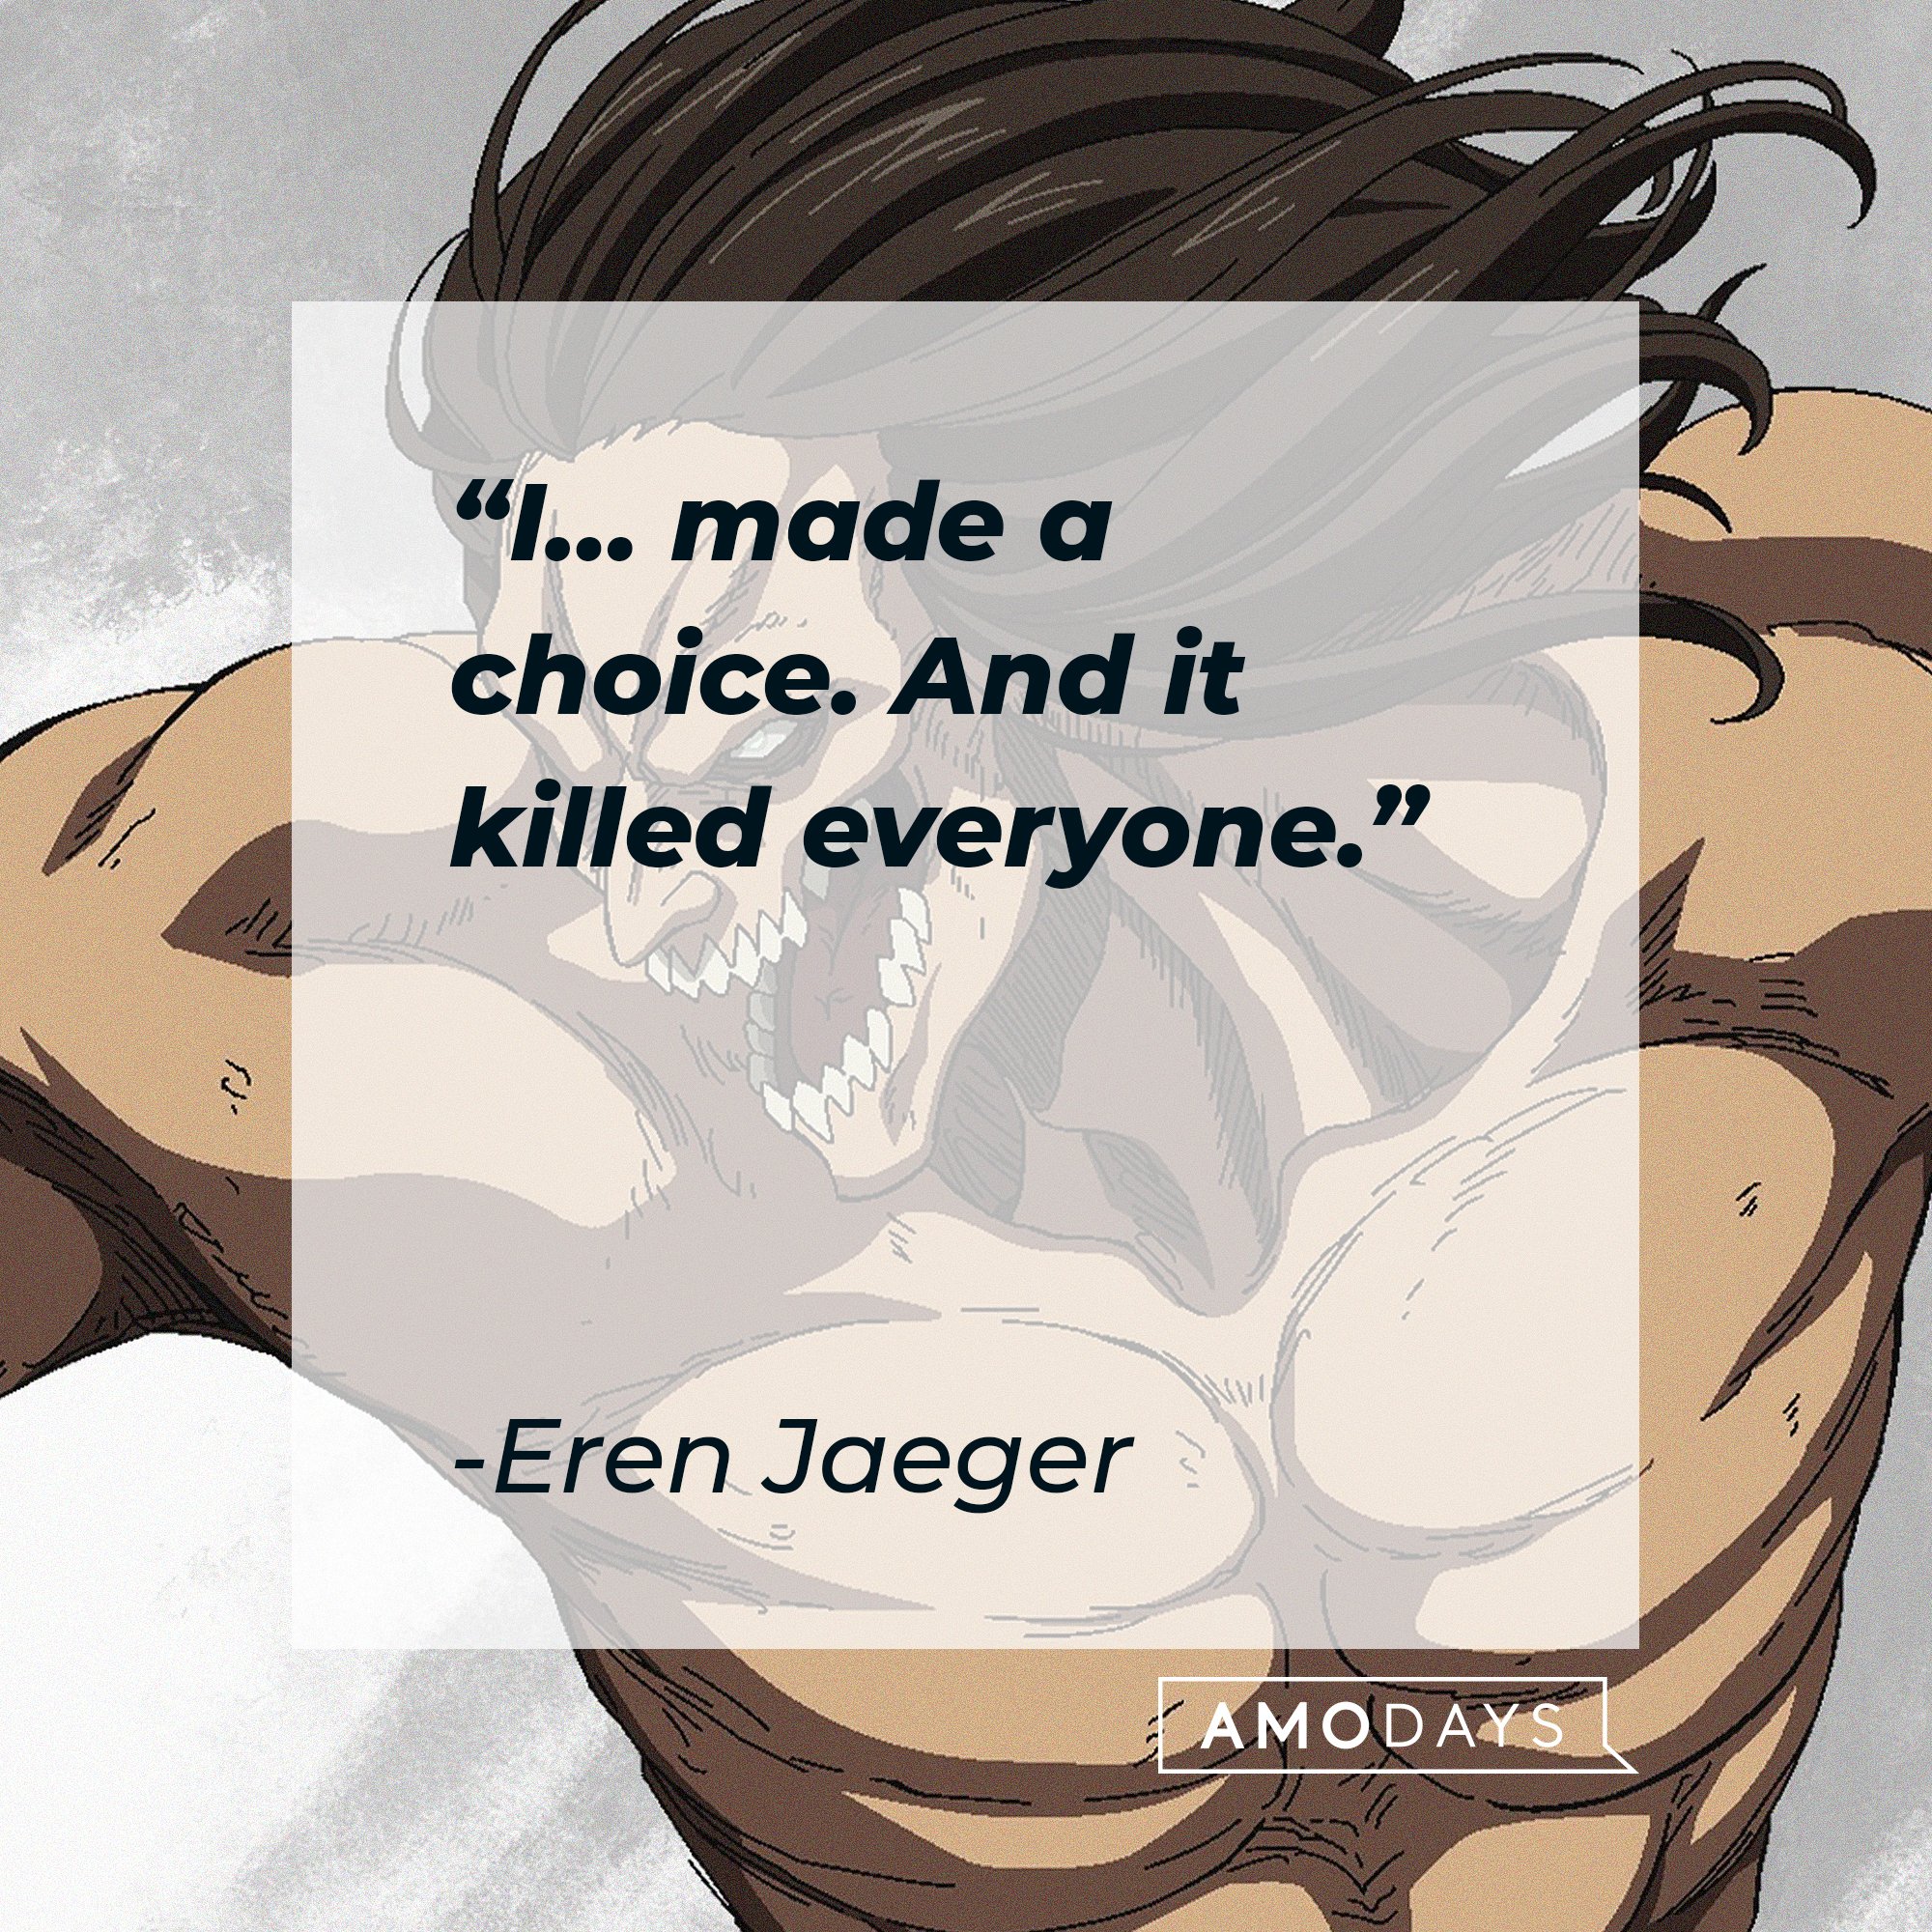 Eren Jaeger’s quote: "I… made a choice. And it killed everyone." | Image: AmoDays